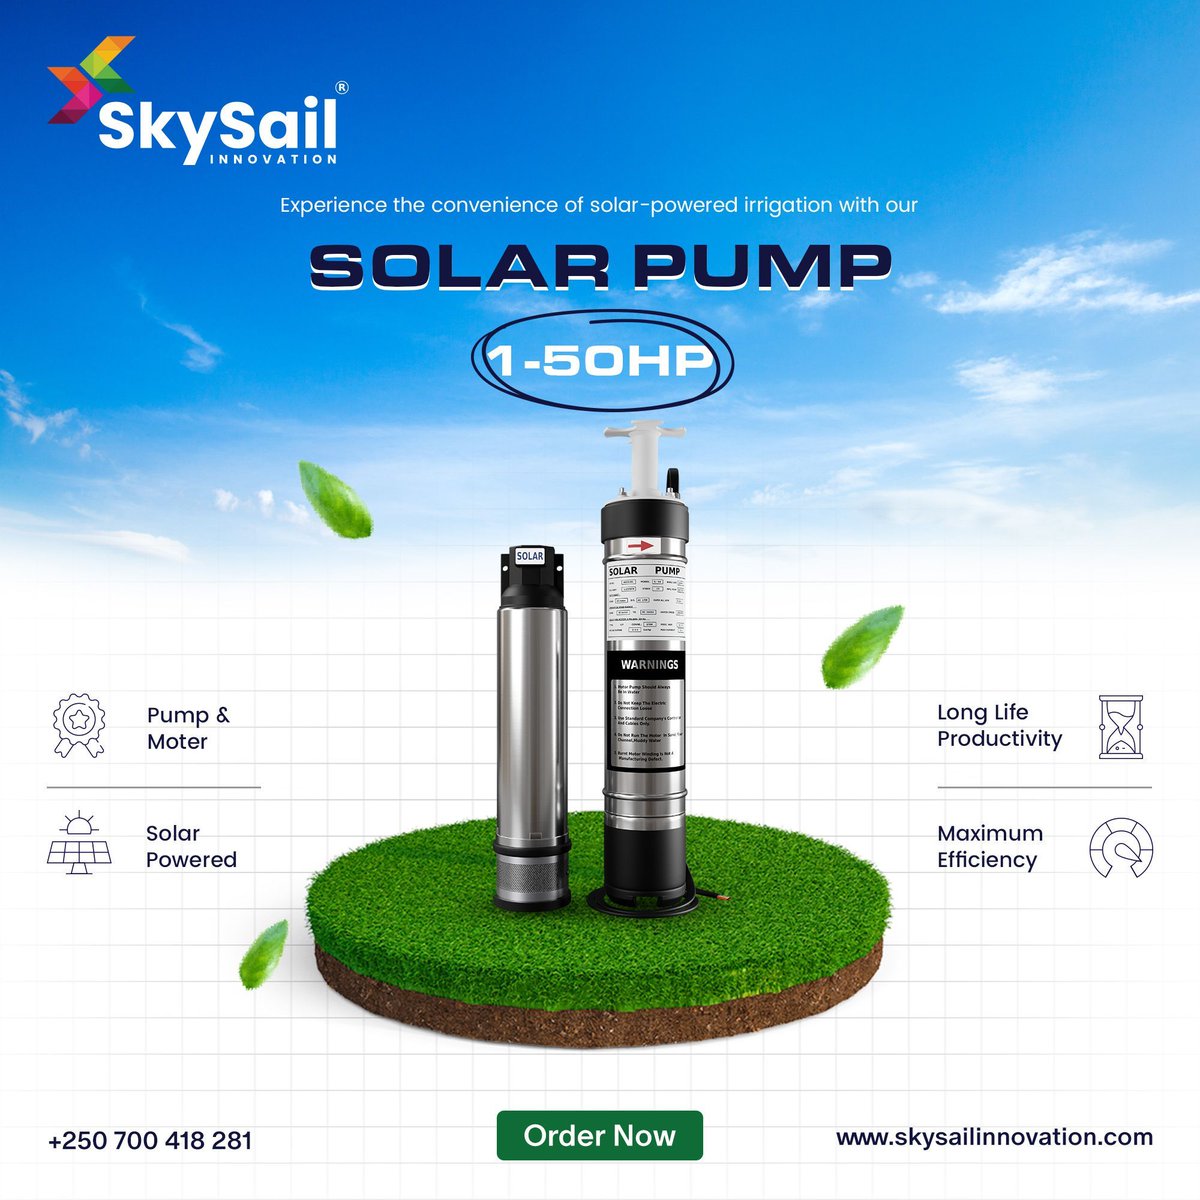 Transform your irrigation system with the convenience of Solar Powered technology! ☀️ Say goodbye to reliance on traditional power sources with our Solar Pump ranging from 1 to 50HP. Embrace efficiency and sustainability in agriculture! #SkySailInnovation #SolarPower #Irrigation